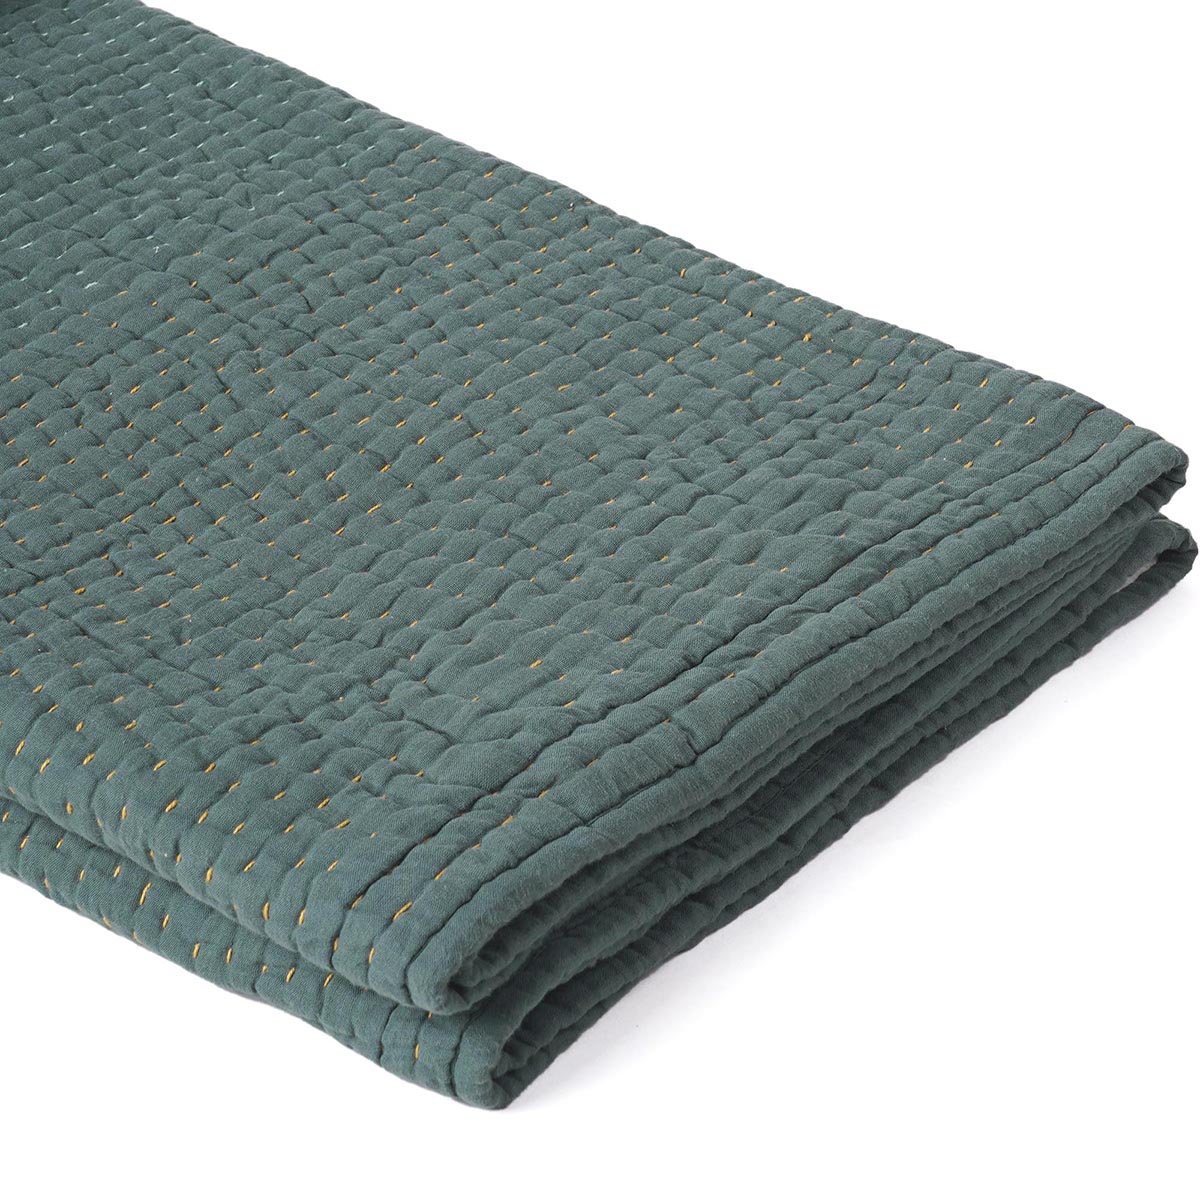 Olive colour muslin gauze hand quilted Throw blanket, simple stripe quilting, 100% cotton, 50X60 inches